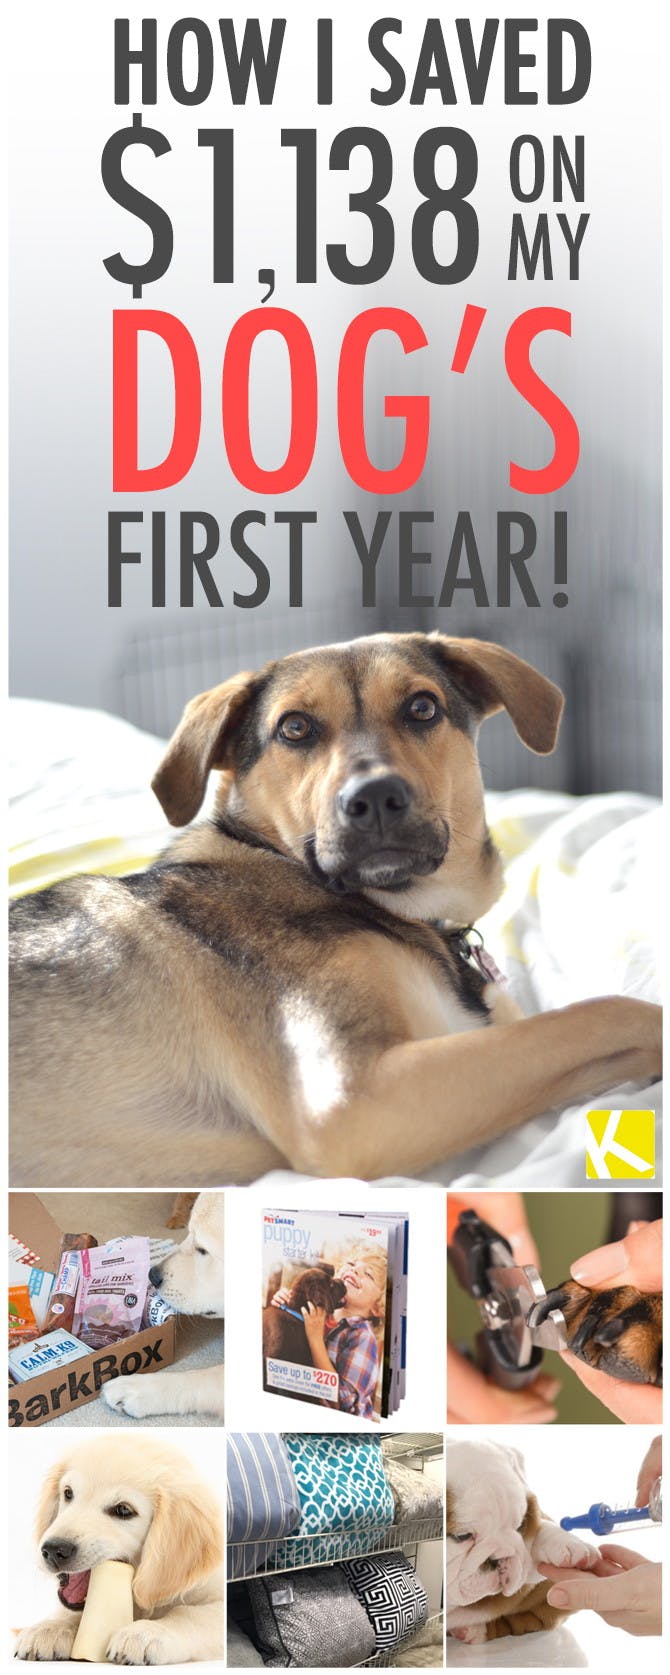 How I Saved $1,138 on My Dog's First Year!